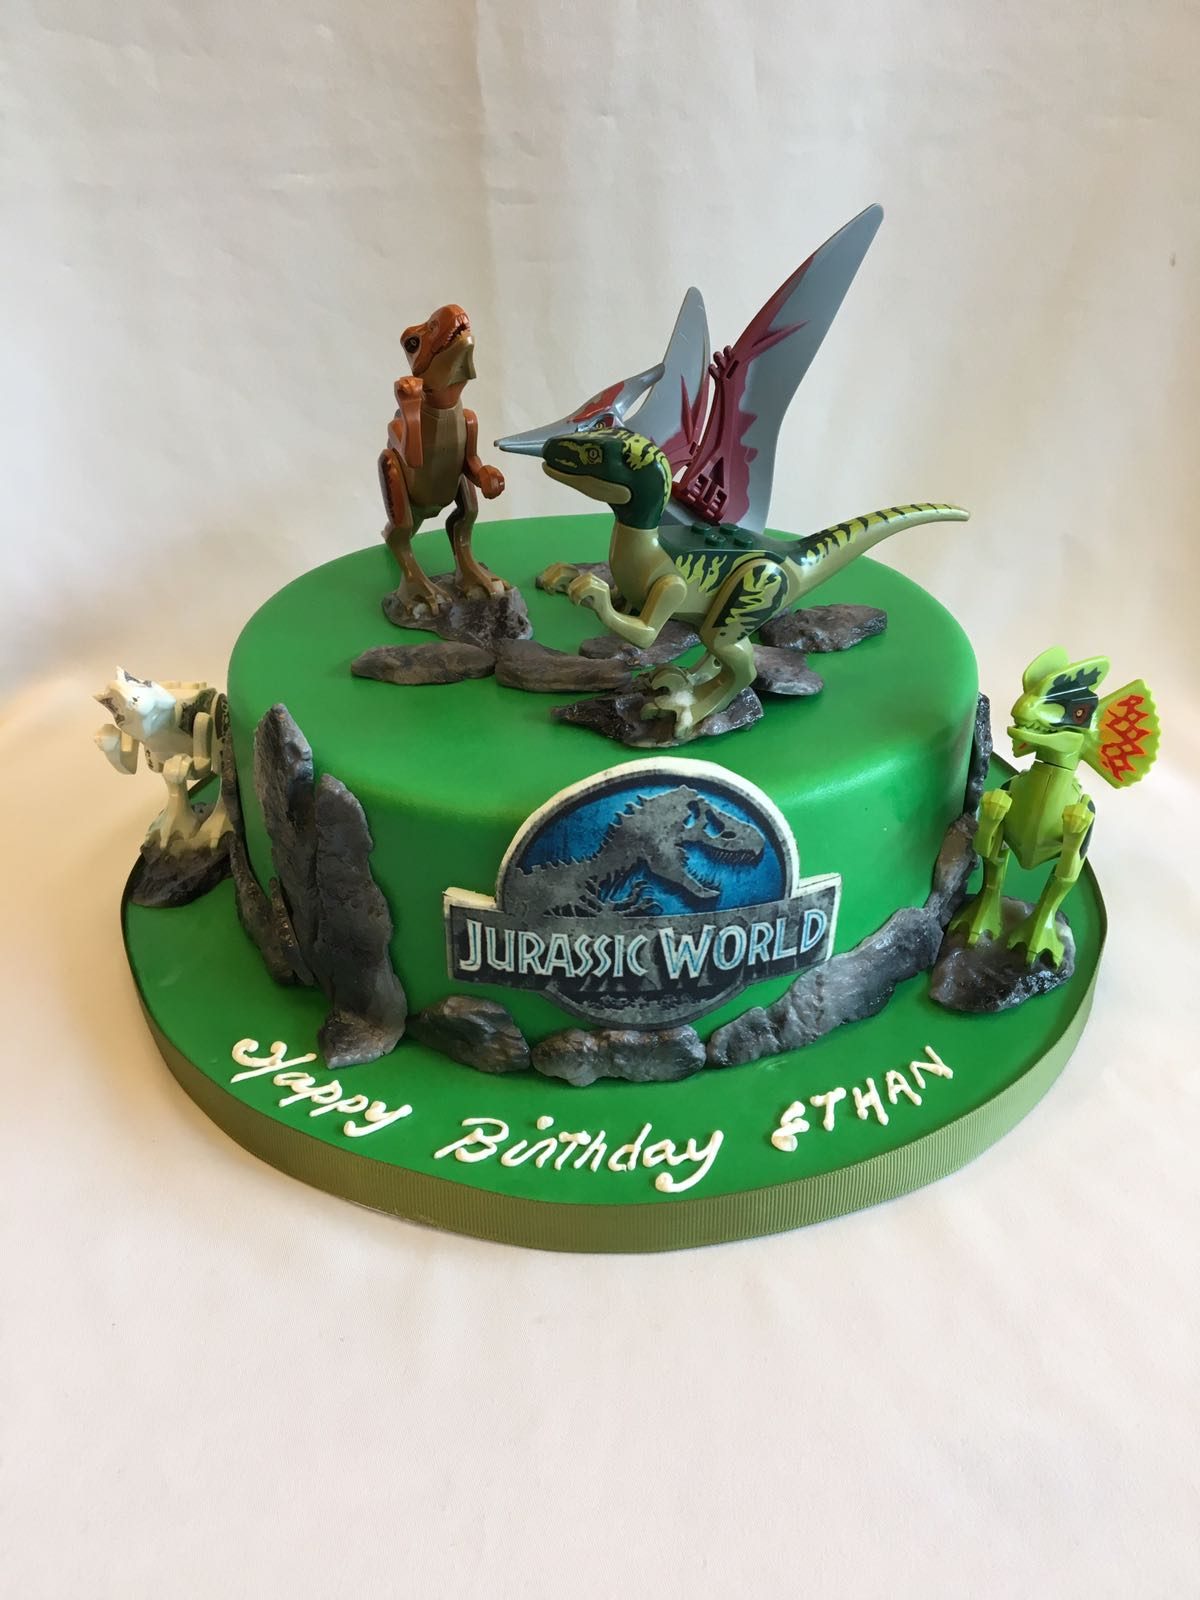 Jurassic World Themed Cake with Action Figure Lego Toppers by Temptations Cake